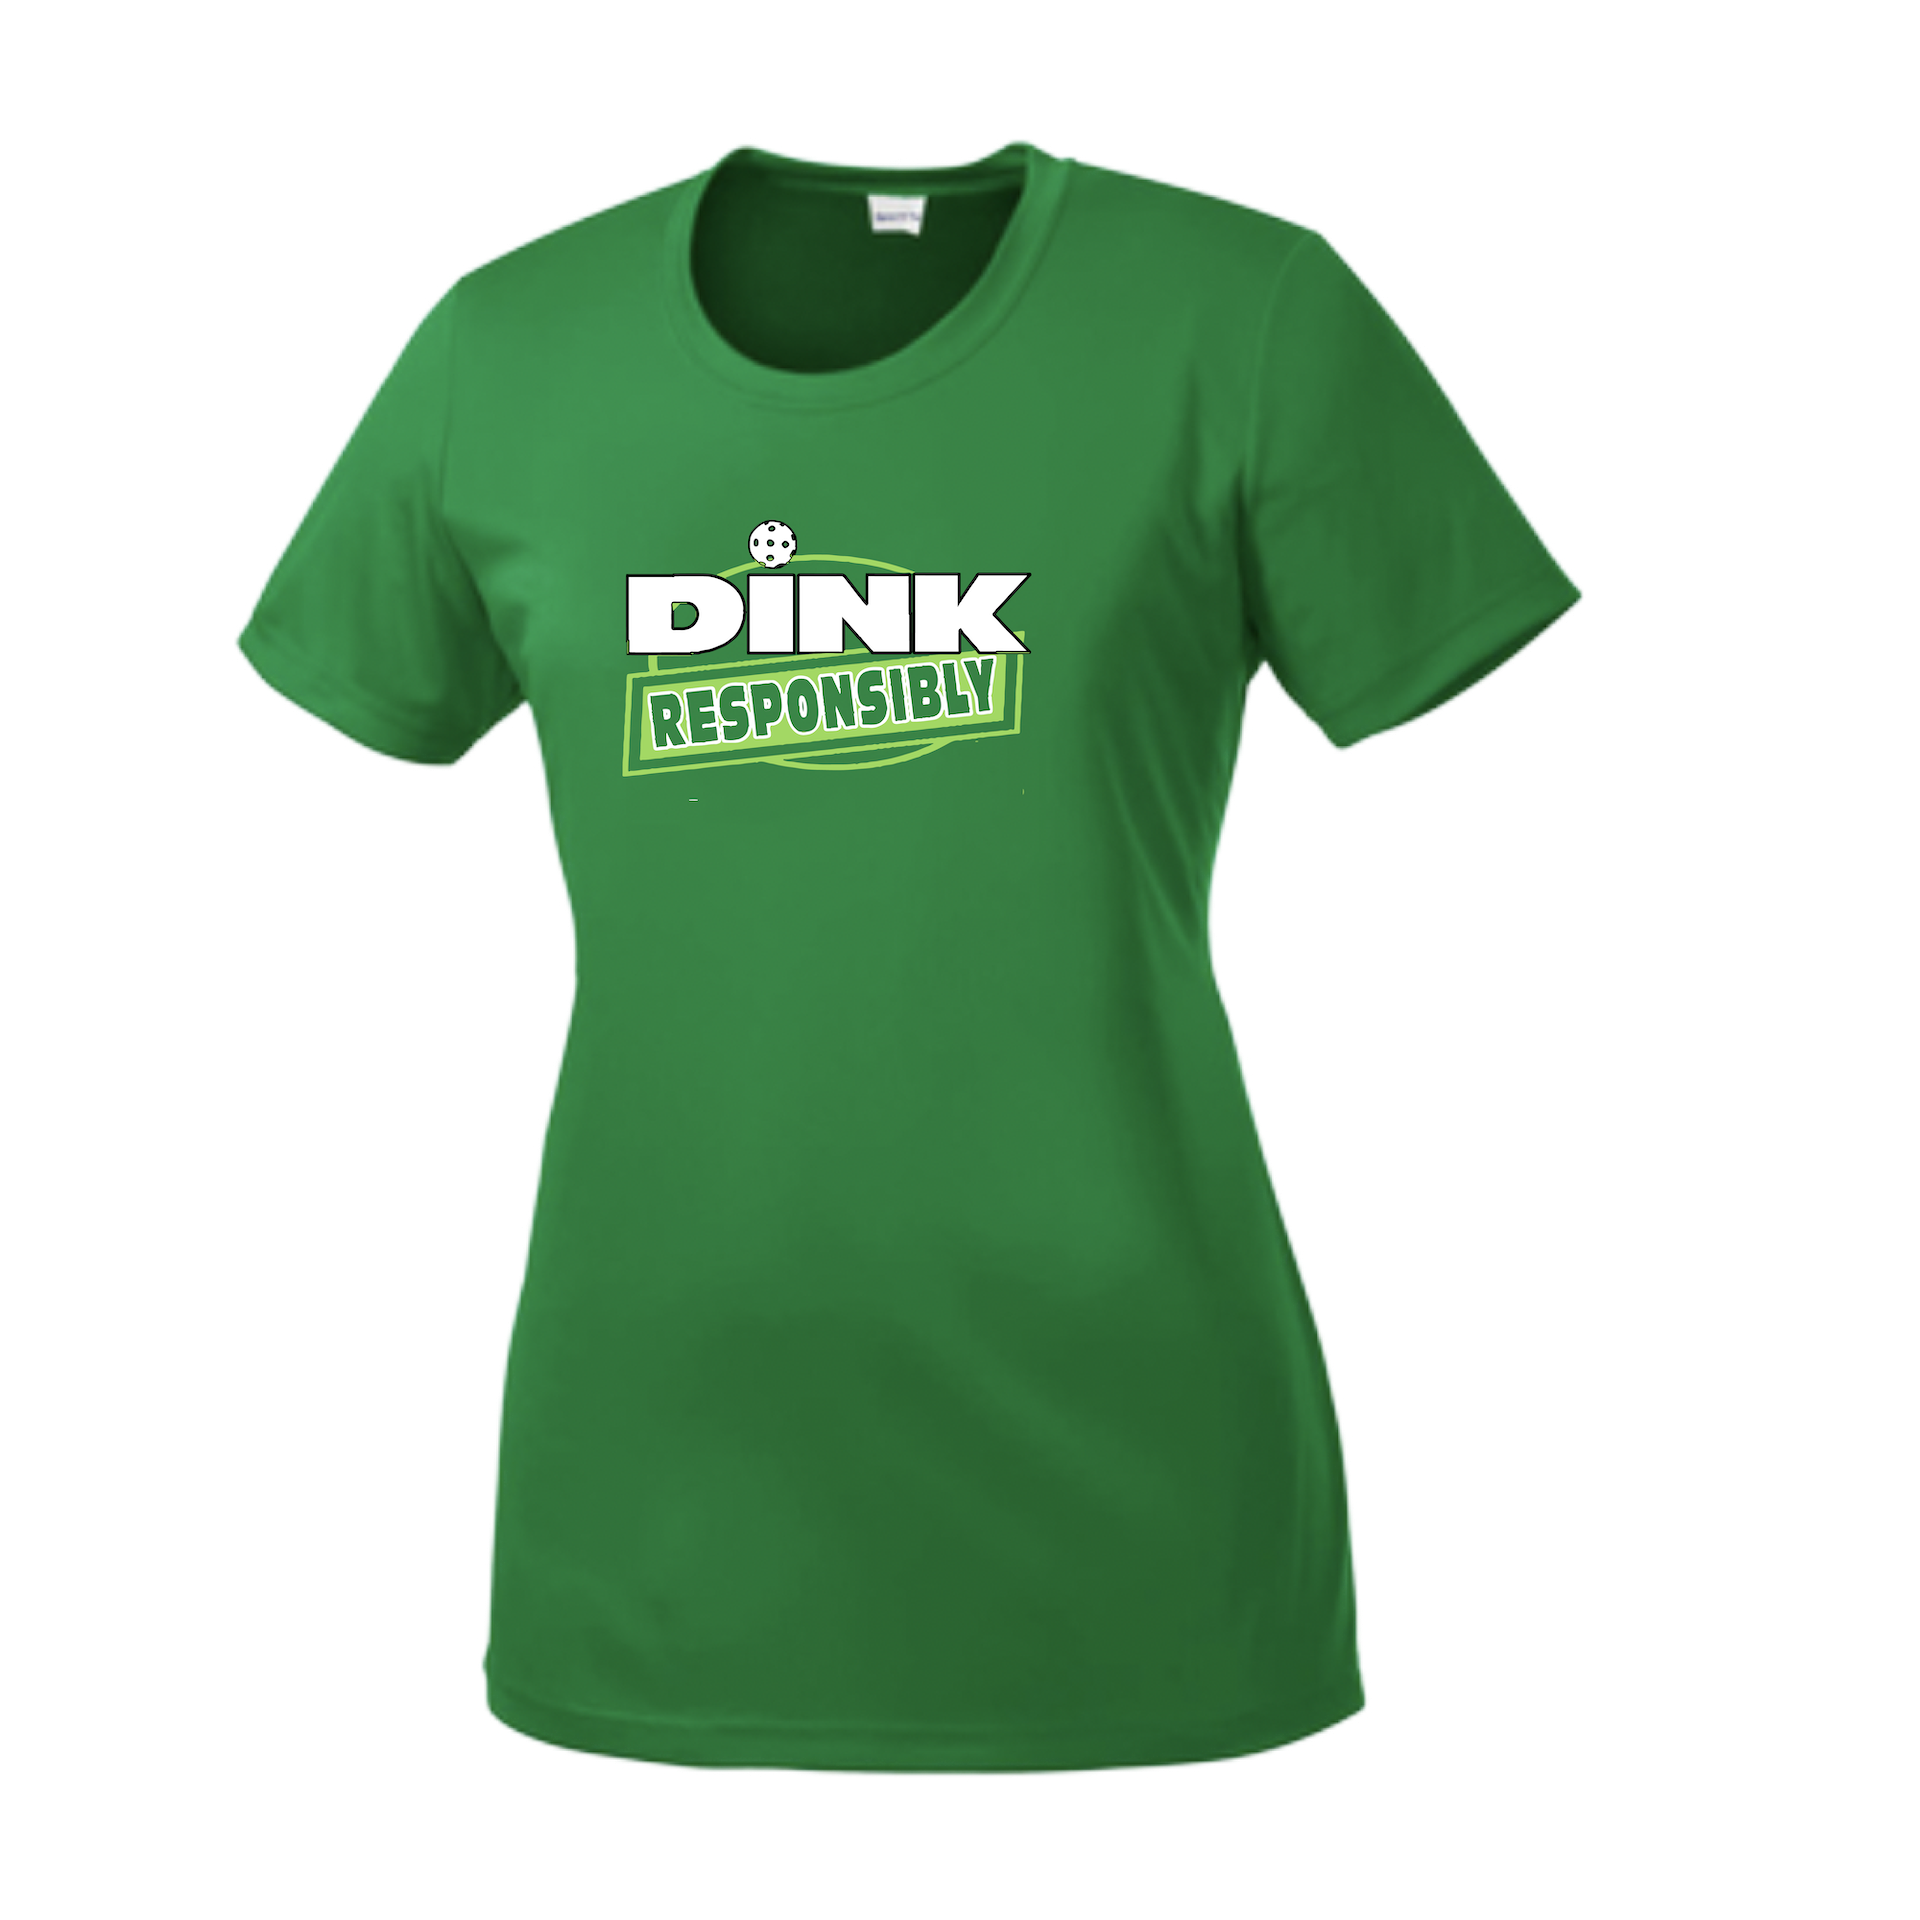 Pickleball Design: Dink Responsibly  Women's Style:  Short-Sleeve Crew-Neck  Shirts are lightweight, roomy and highly breathable. These moisture-wicking shirts are designed for athletic performance. They feature PosiCharge technology to lock in color and prevent logos from fading. Removable tag and set-in sleeves for comfort.